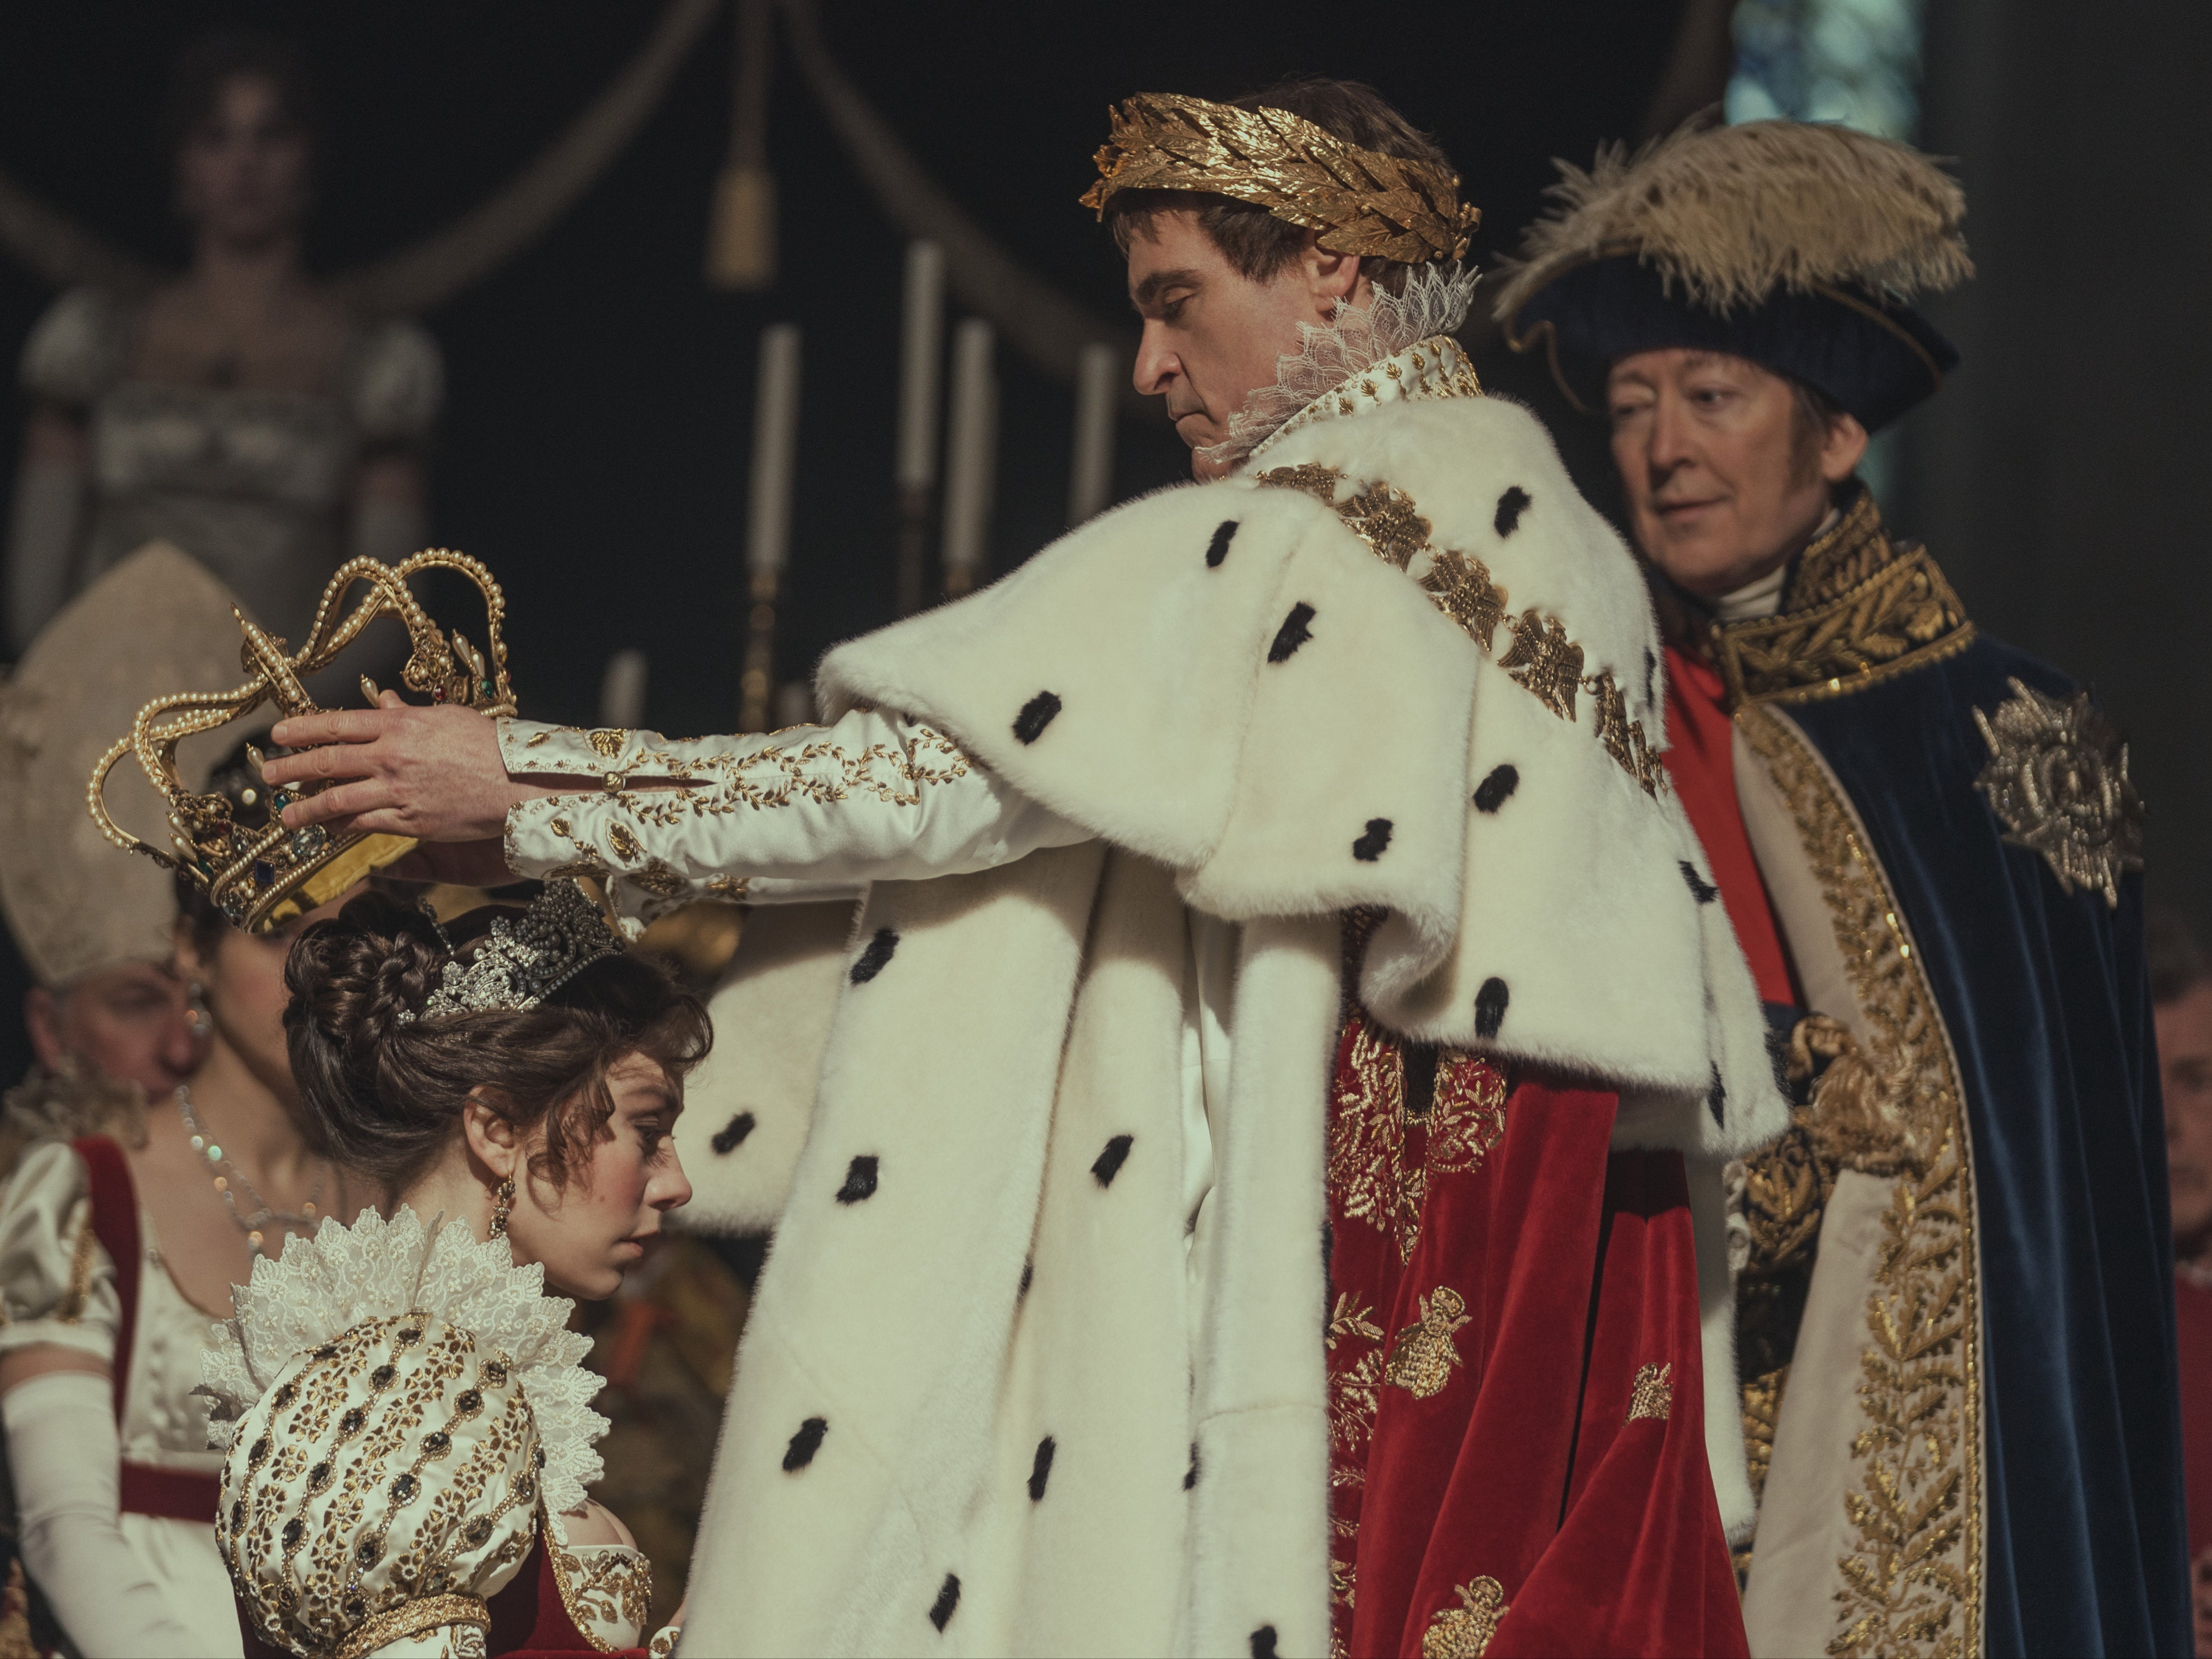 Joaquin Phoenix as Napoléon Bonaparte and Vanessa Kirby as Joséphine de Beauharnais in Ridley Scott’s ‘Napoleon’. In this scene, Bonaparte has just been crowned emperor and his wife is being crowned empress